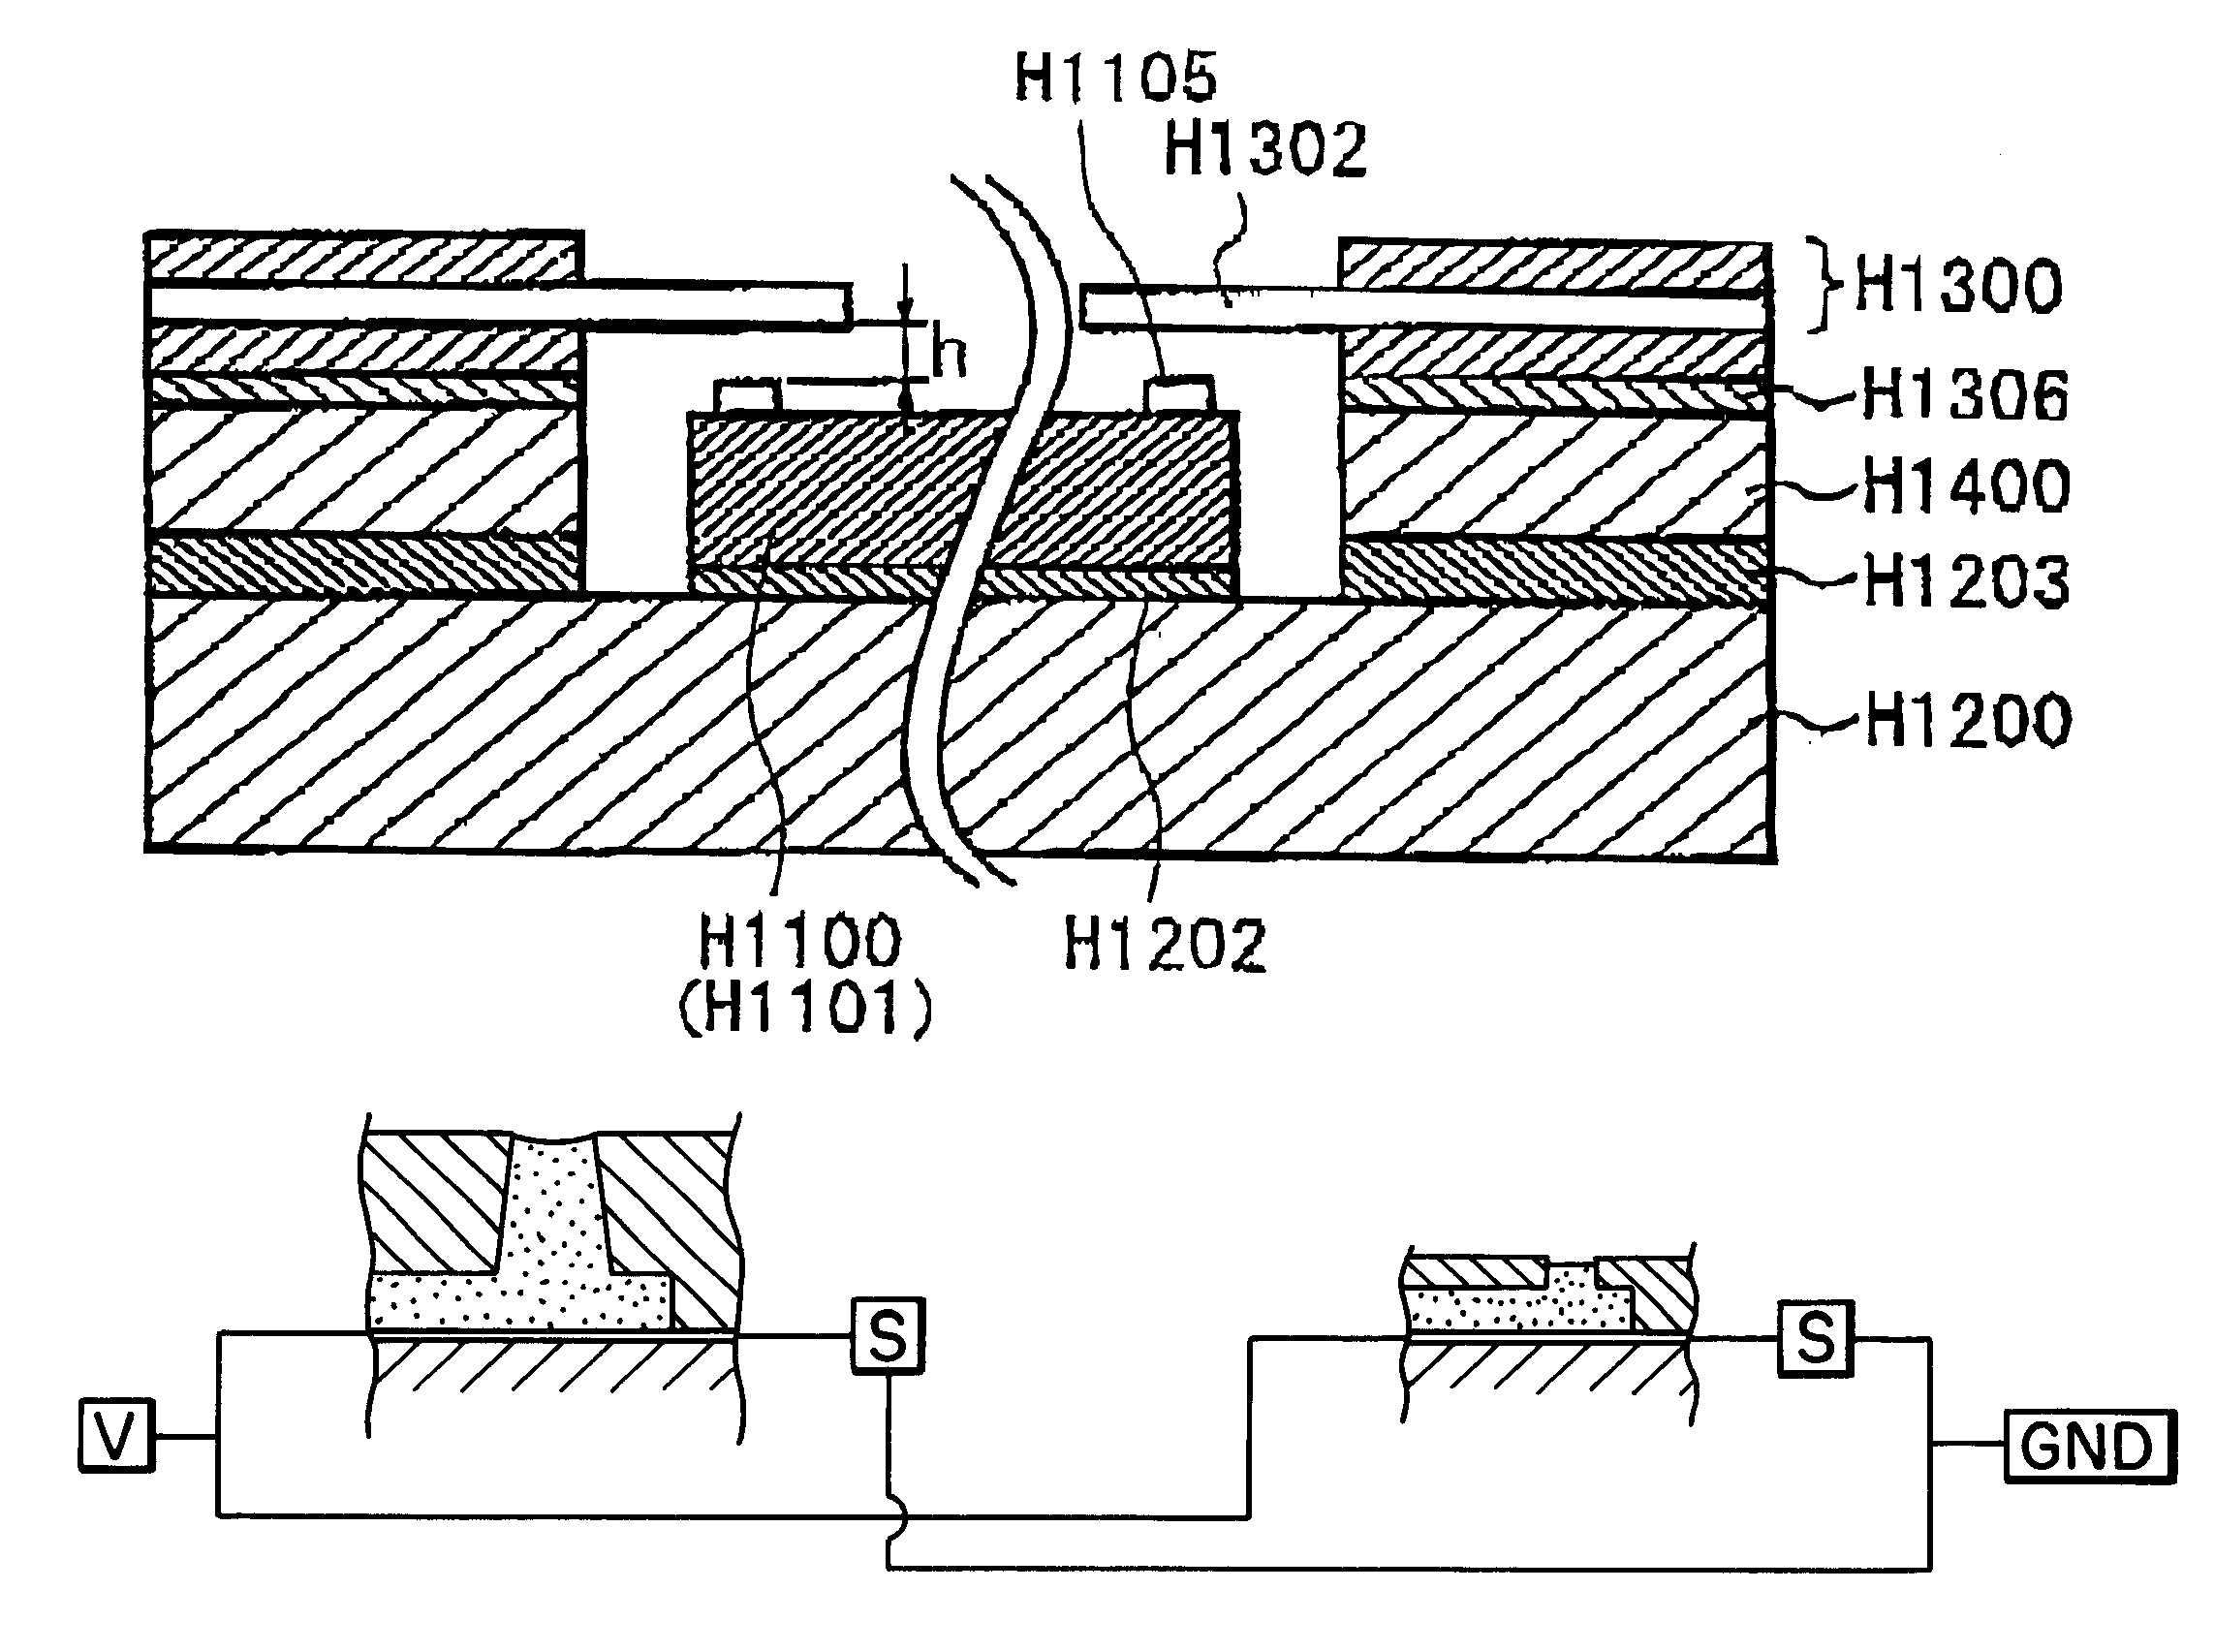 Ink jet recording head and recording apparatus having recording element substrates with different liquid ejection systems